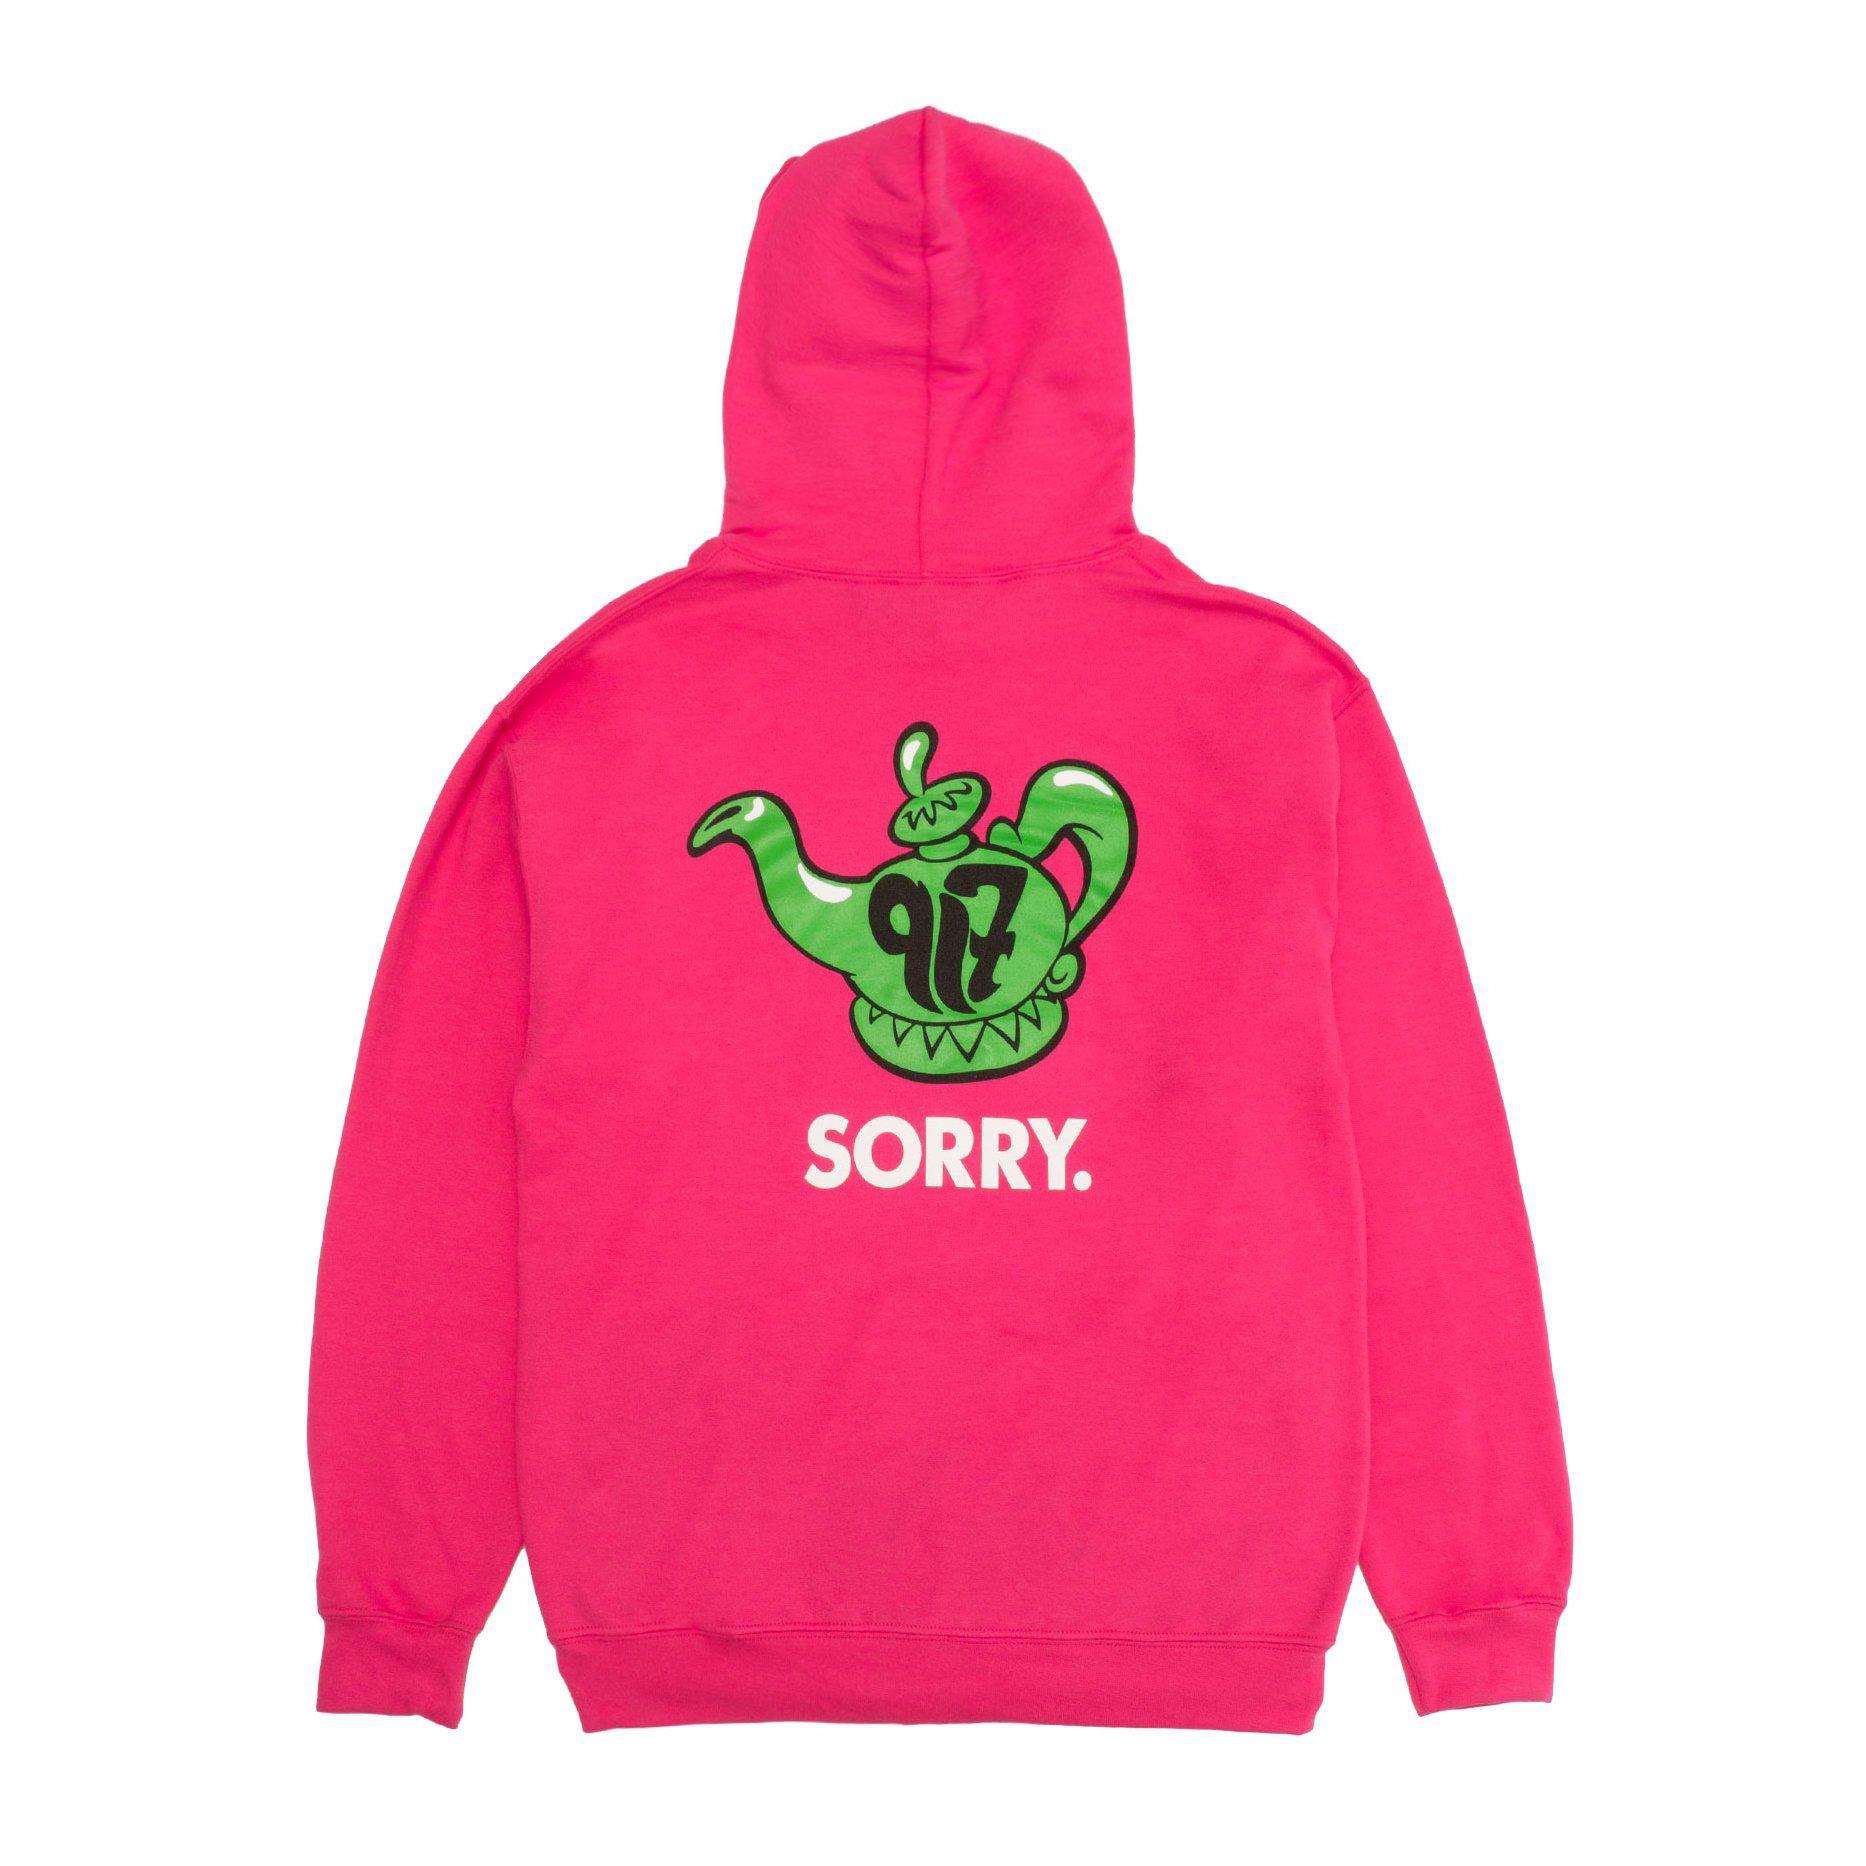 917 Really Sorry Pullover Hoodie (Pink) by 917